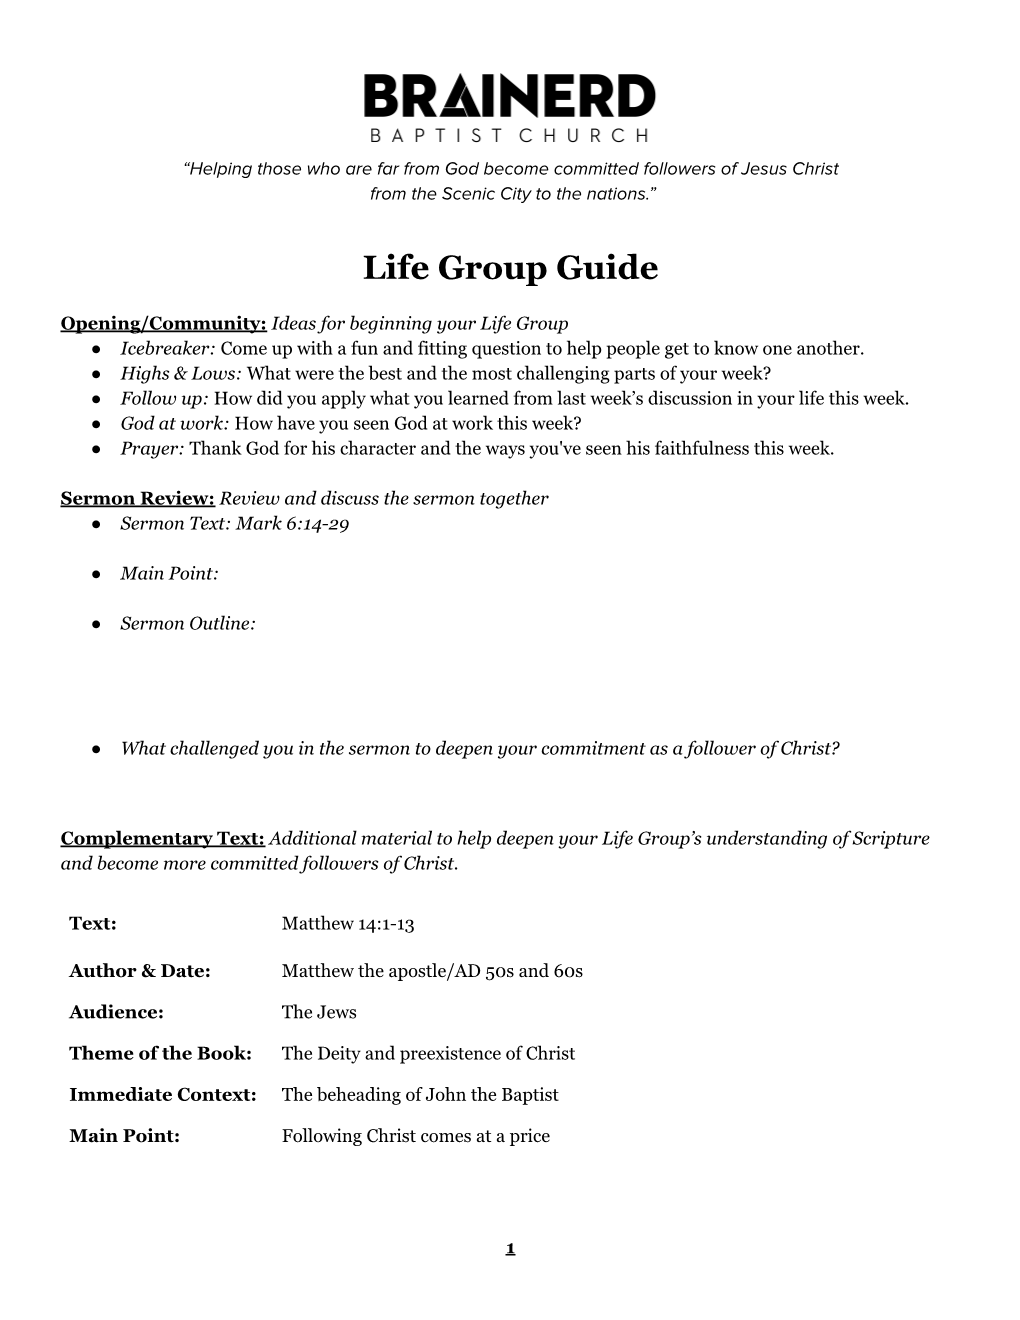 Life Group Guide